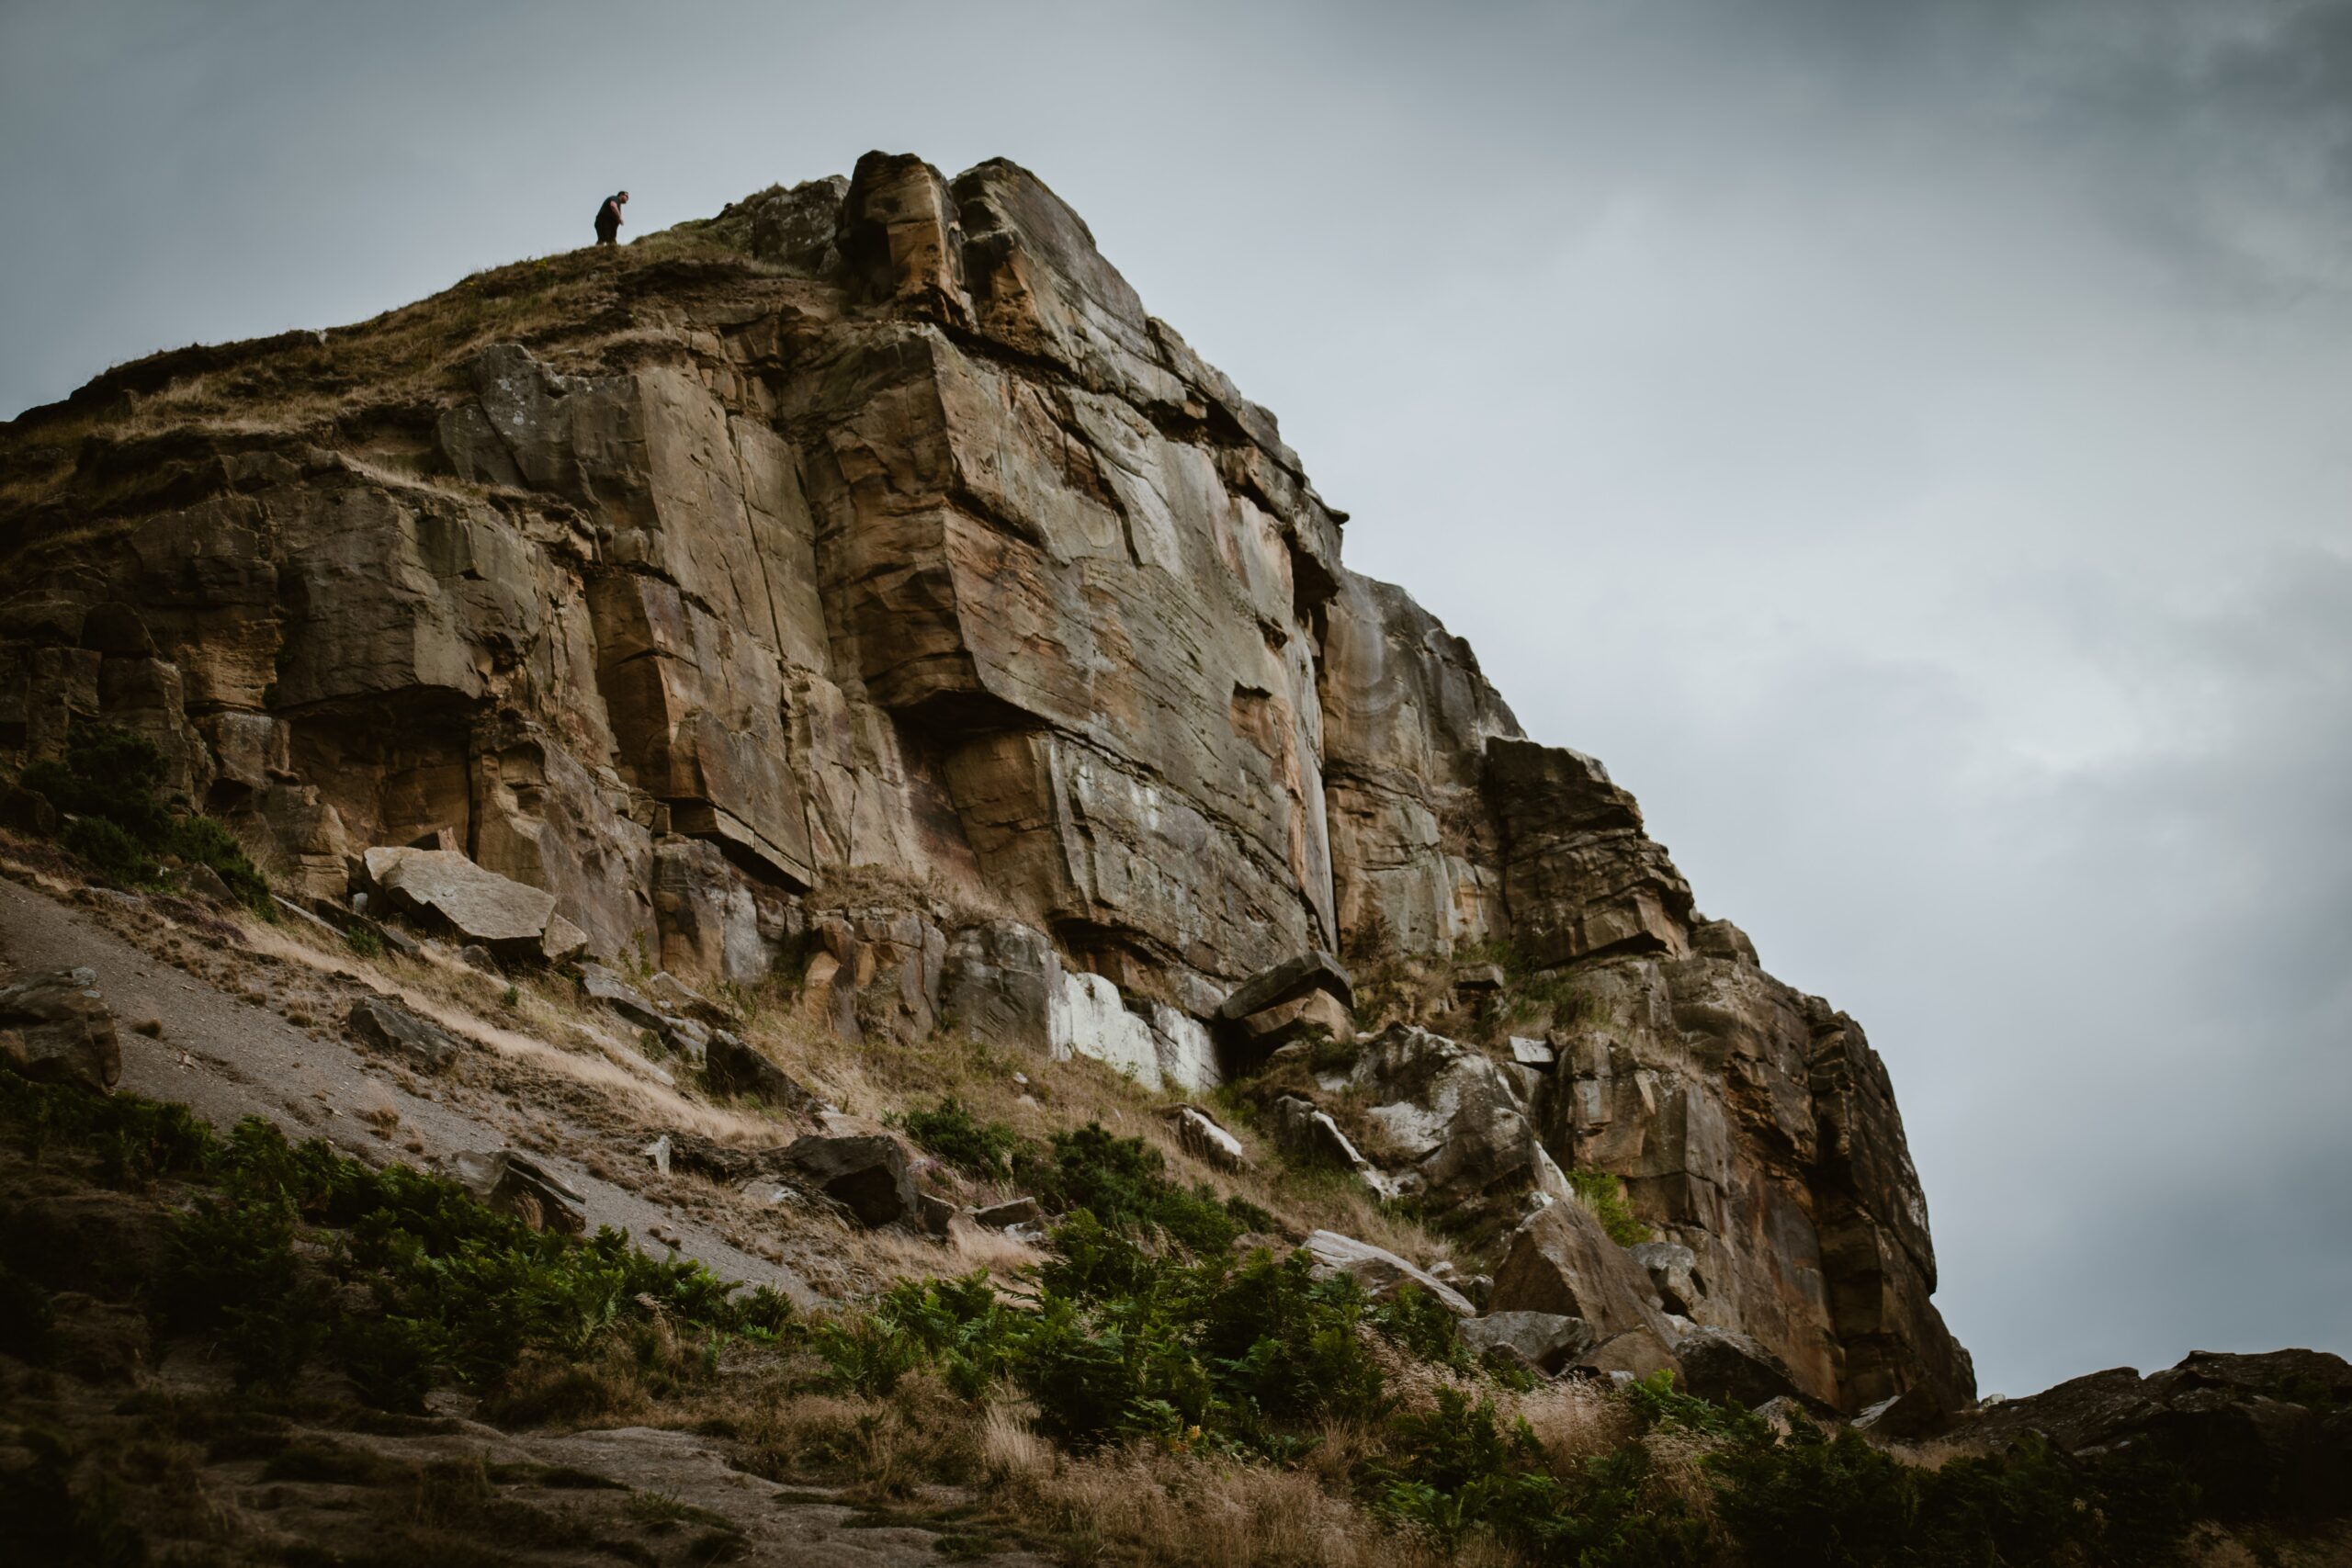 Image of Roseberry Topping, a mountain in Teesside